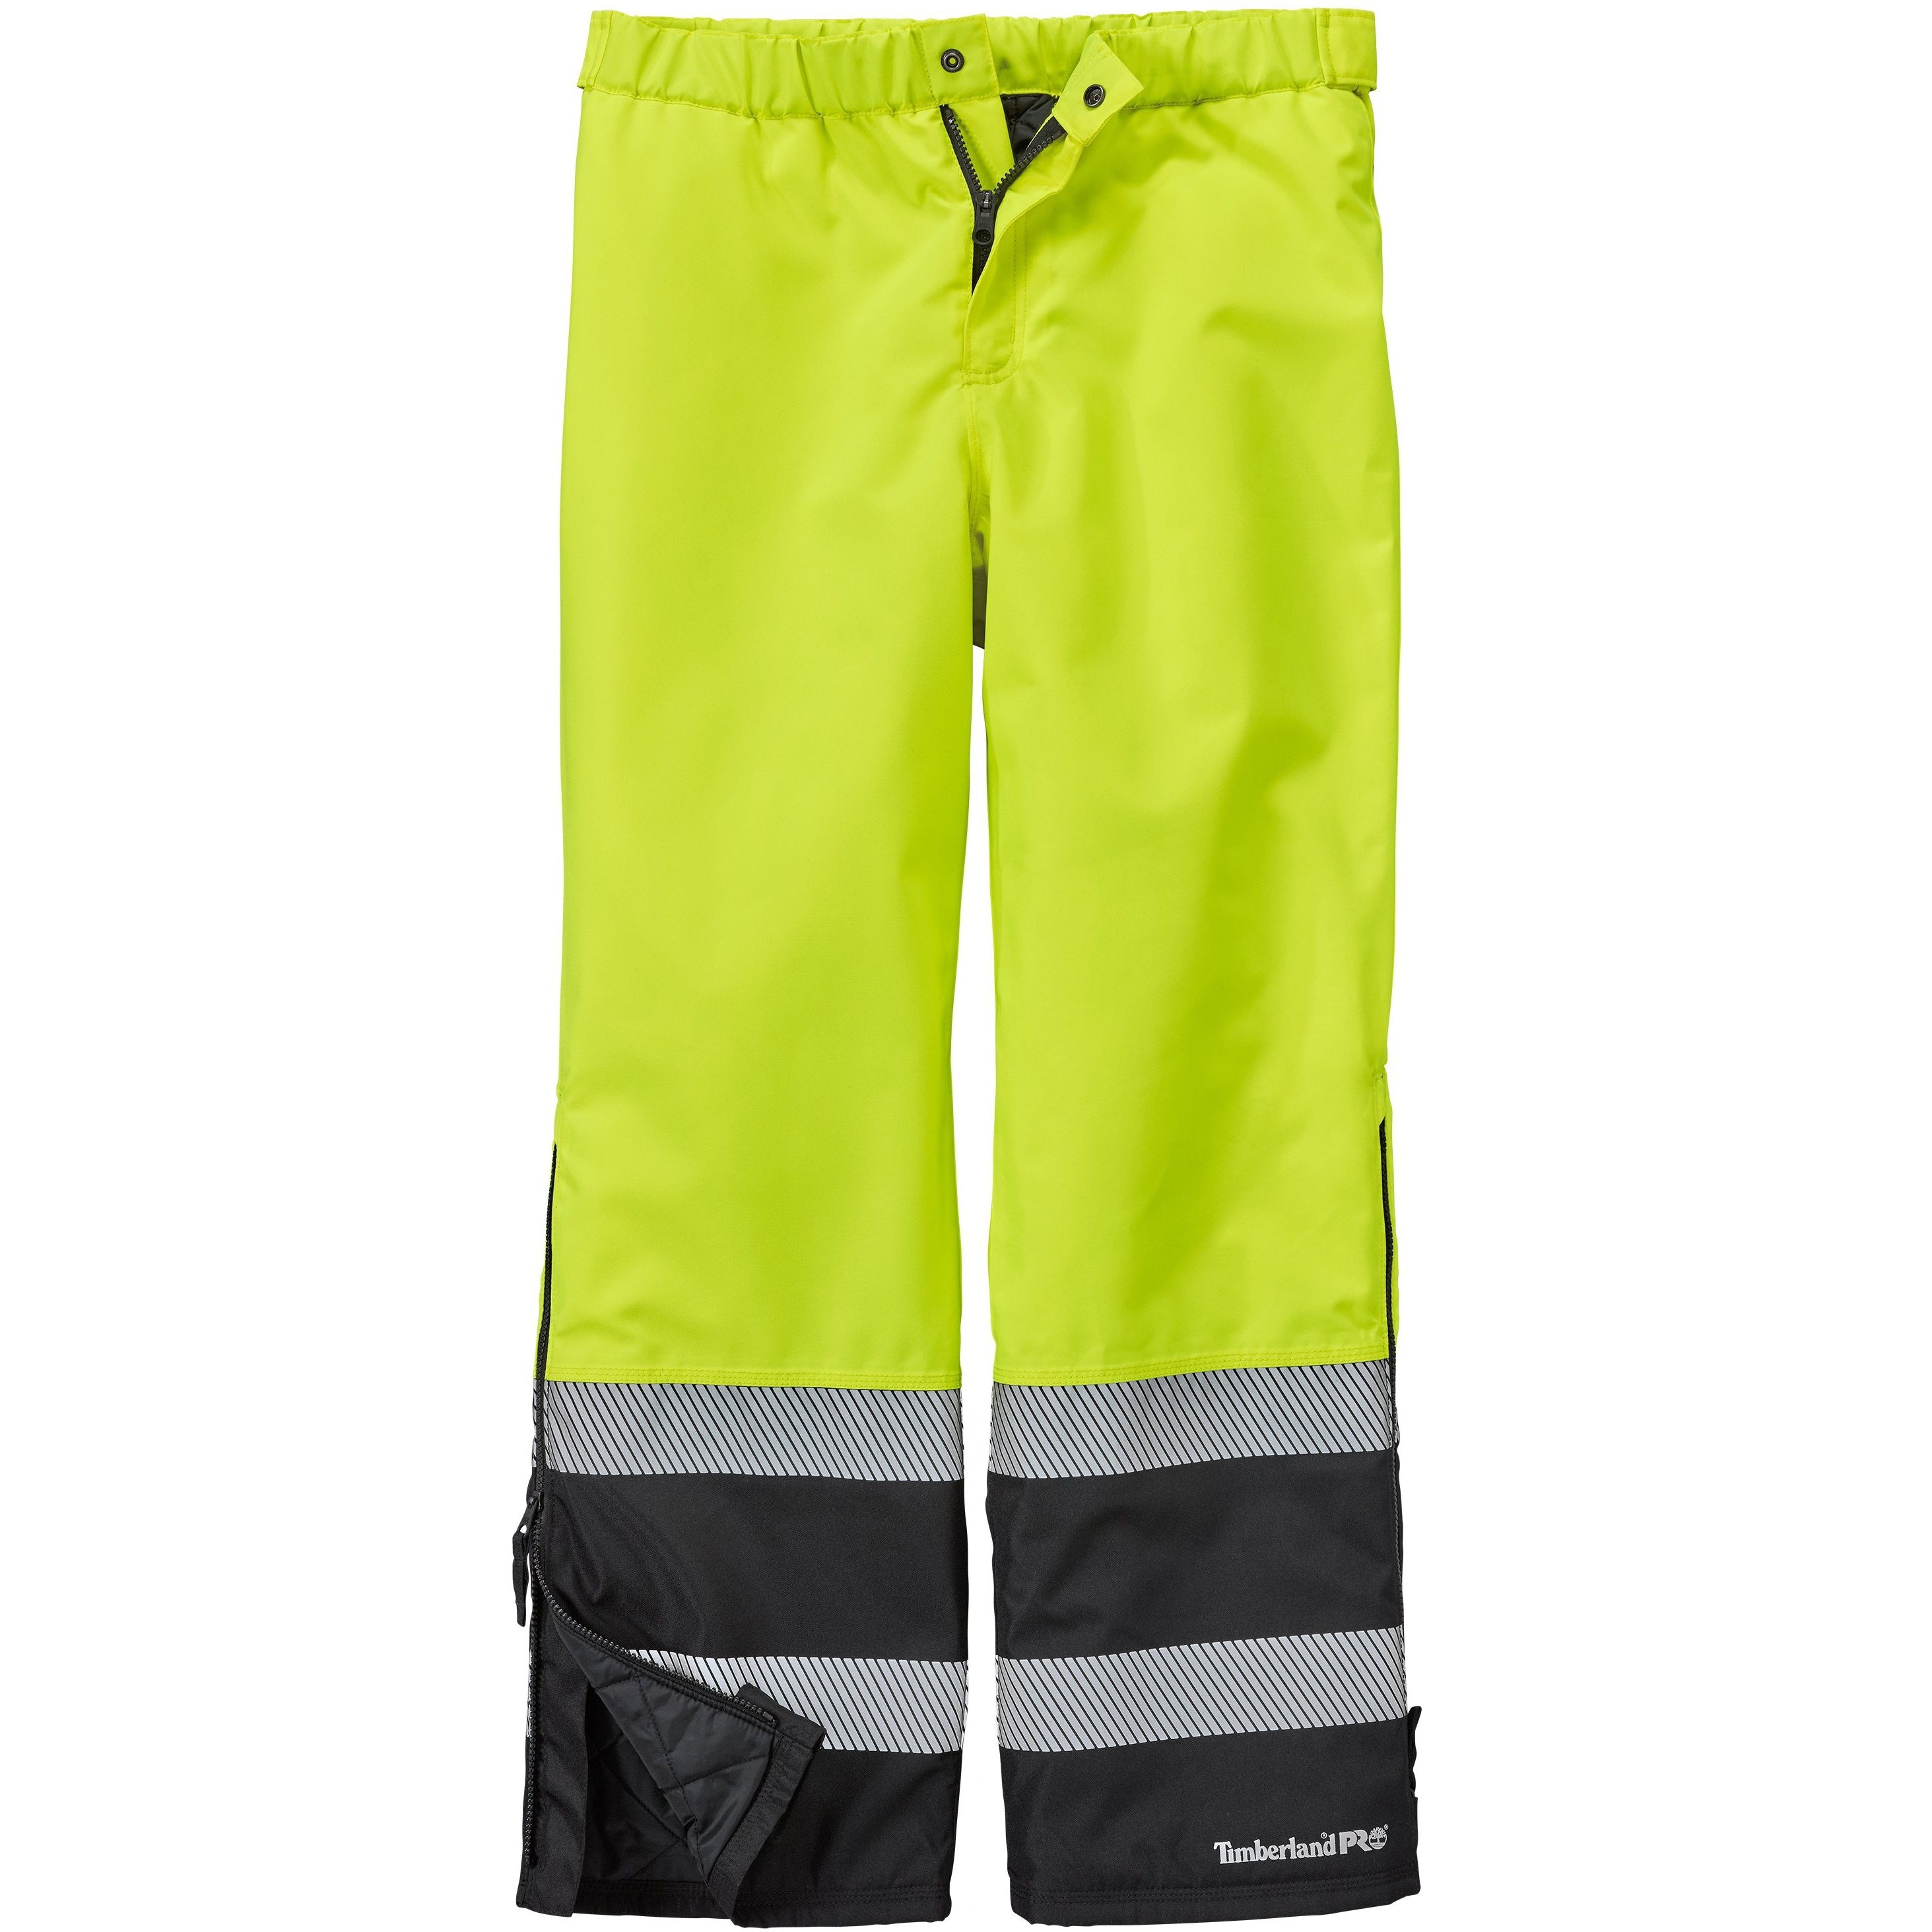 Timberland Pro Men's Work Sight High-Visibility Ins Pant TB0A1HMUI47 Small / Yellow - Overlook Boots